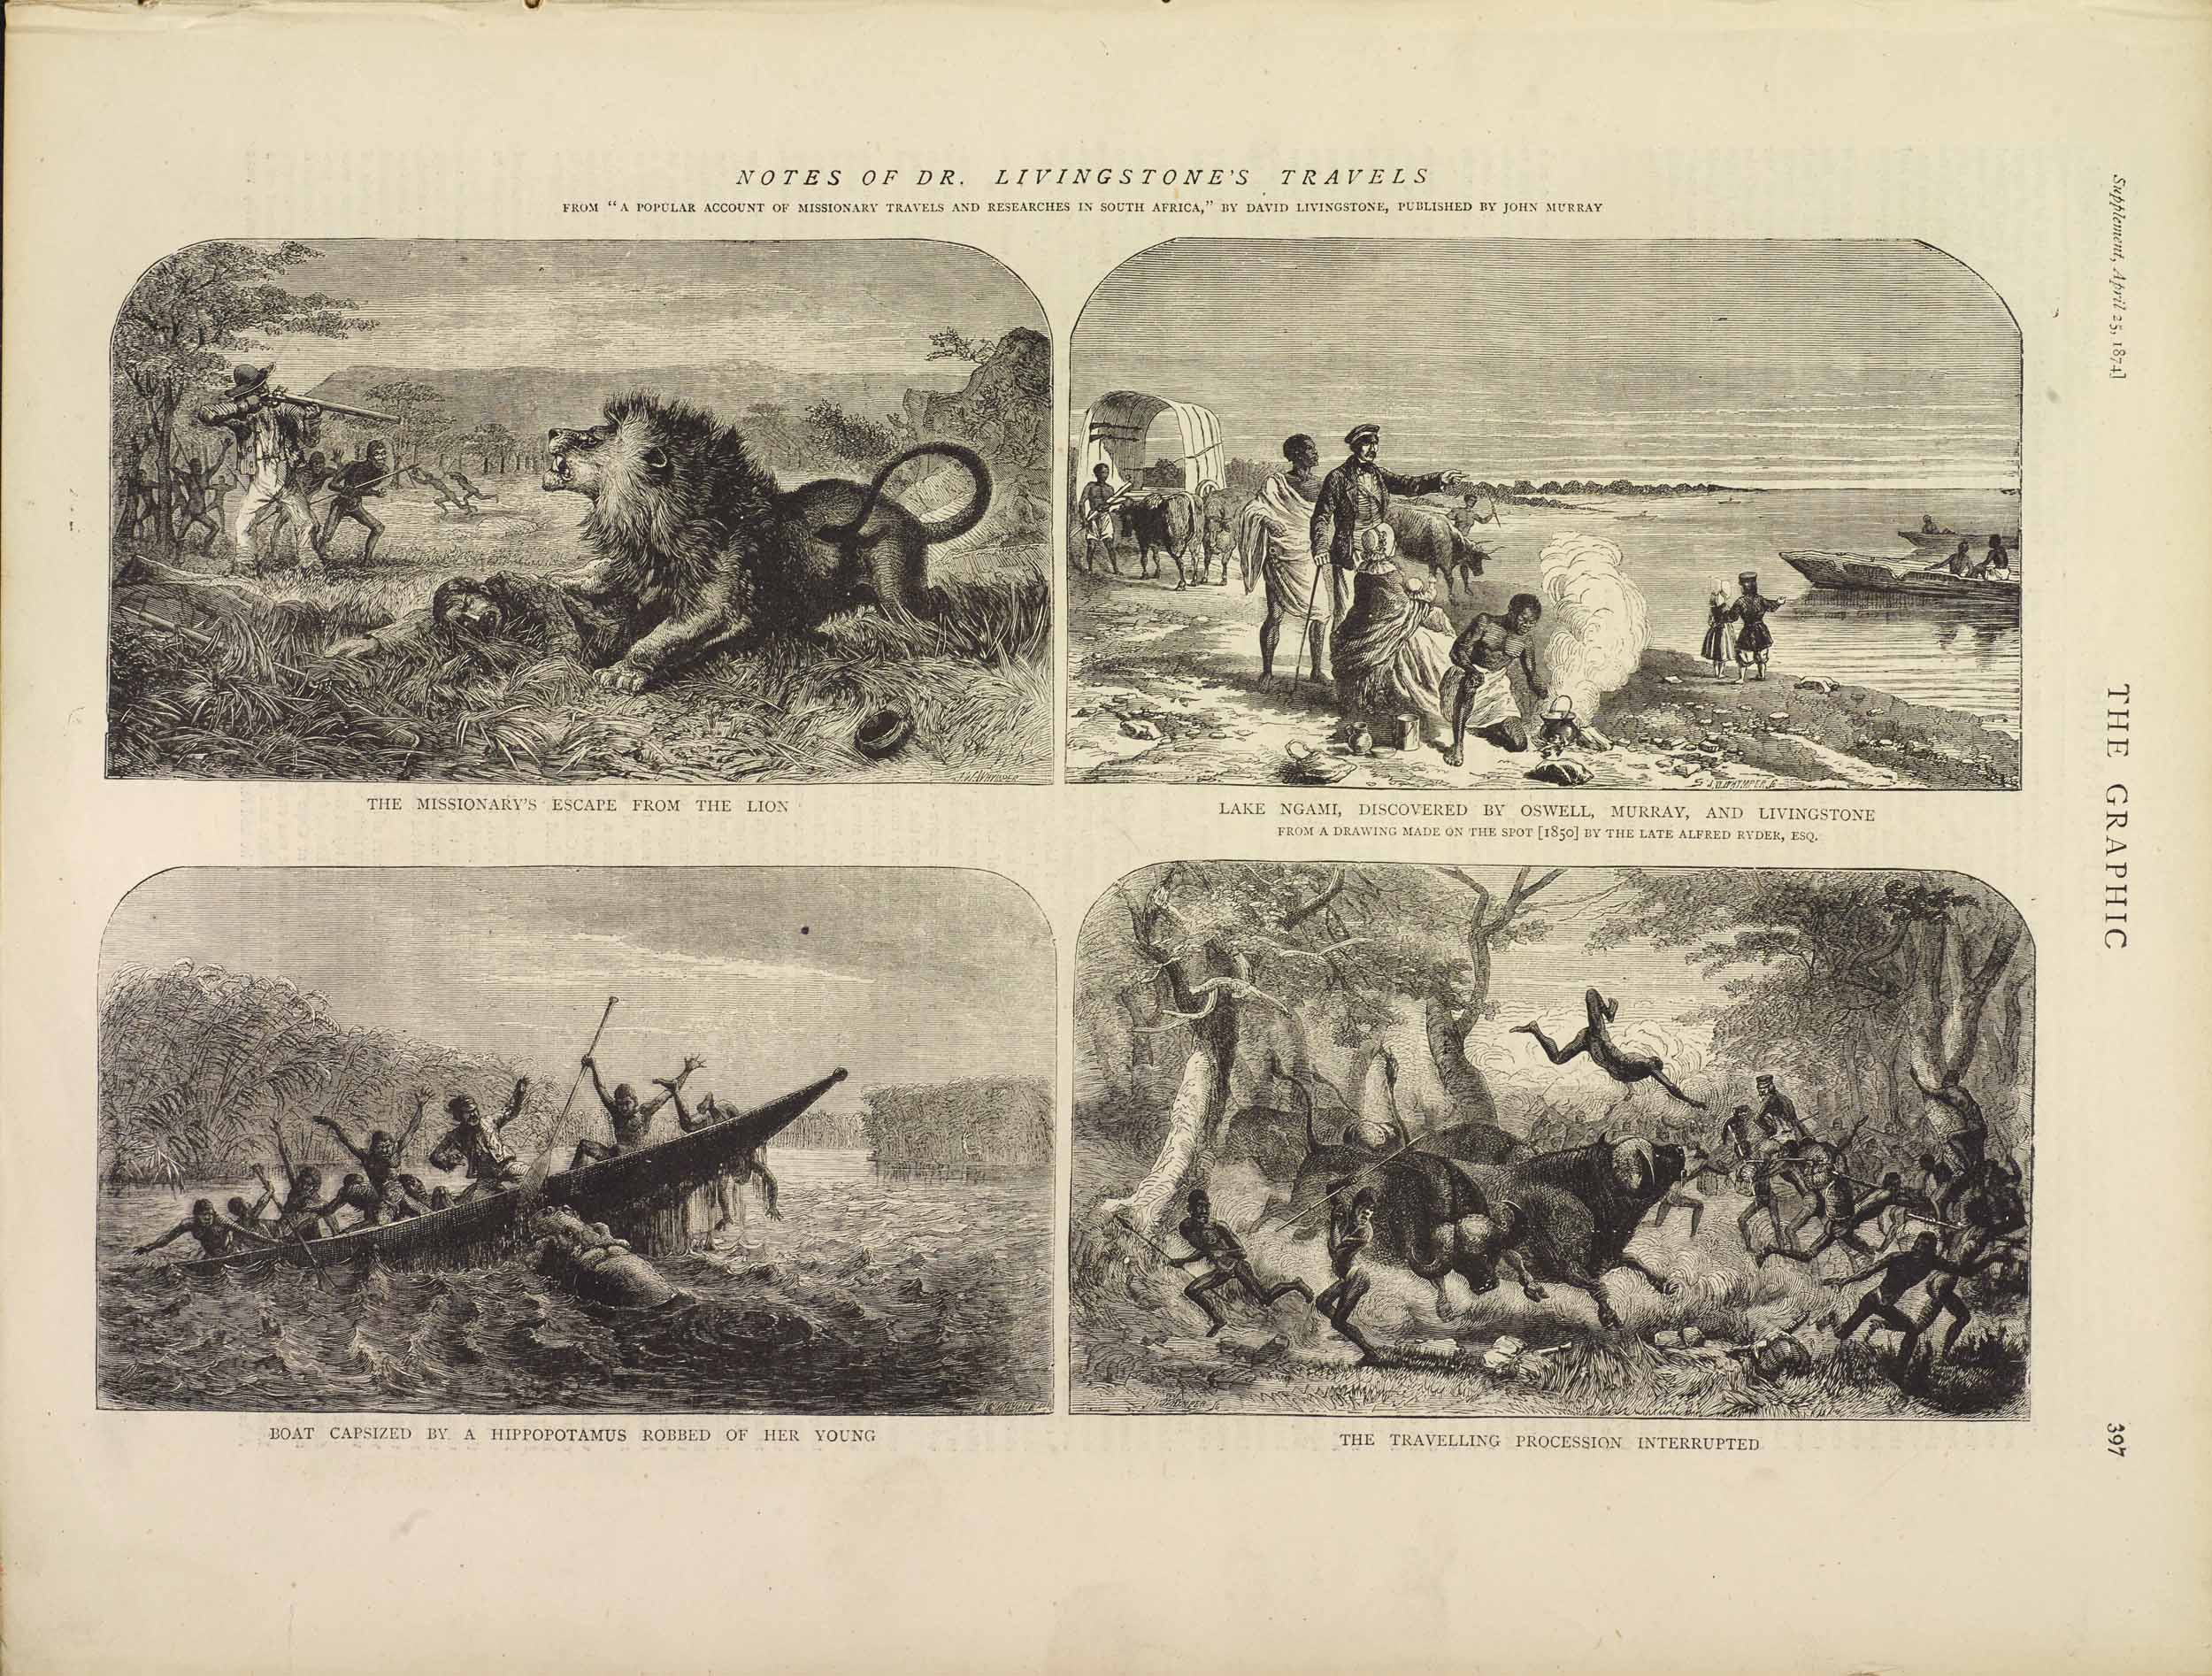 Missionary Travels Illustrations from The Life and Labours of David Livingstone, The Graphic, 25 April 1874, by Henry M. Stanley. Copyright National Library of Scotland.  Creative Commons Share-alike 2.5 UK: Scotland(https://creativecommons.org/licenses/by-nc-sa/2.5/scotland/).